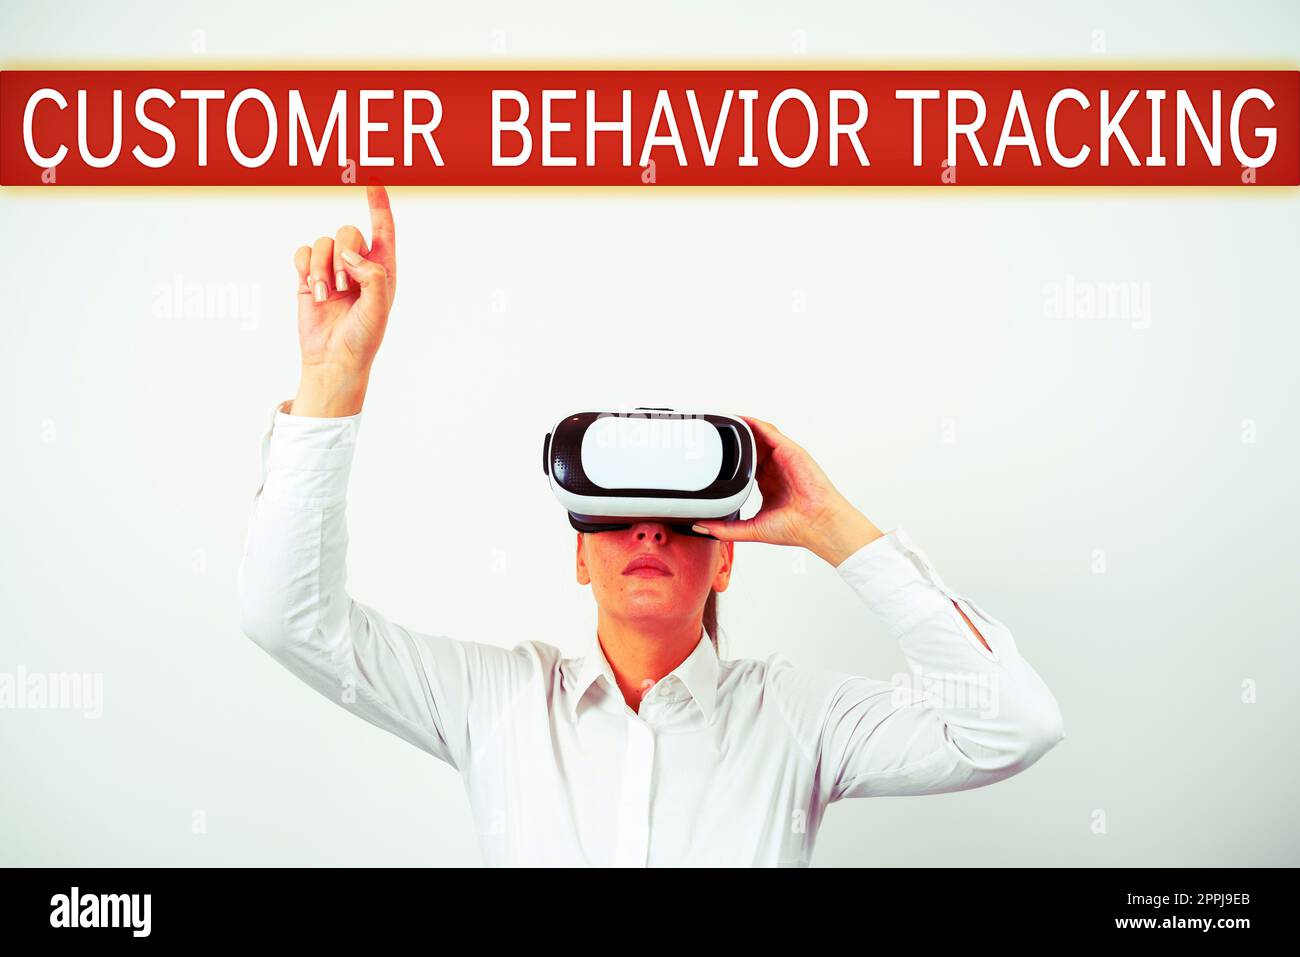 Text sign showing Customer Behavior Tracking. Internet Concept managing behaviour of consumers who use goods Stock Photo